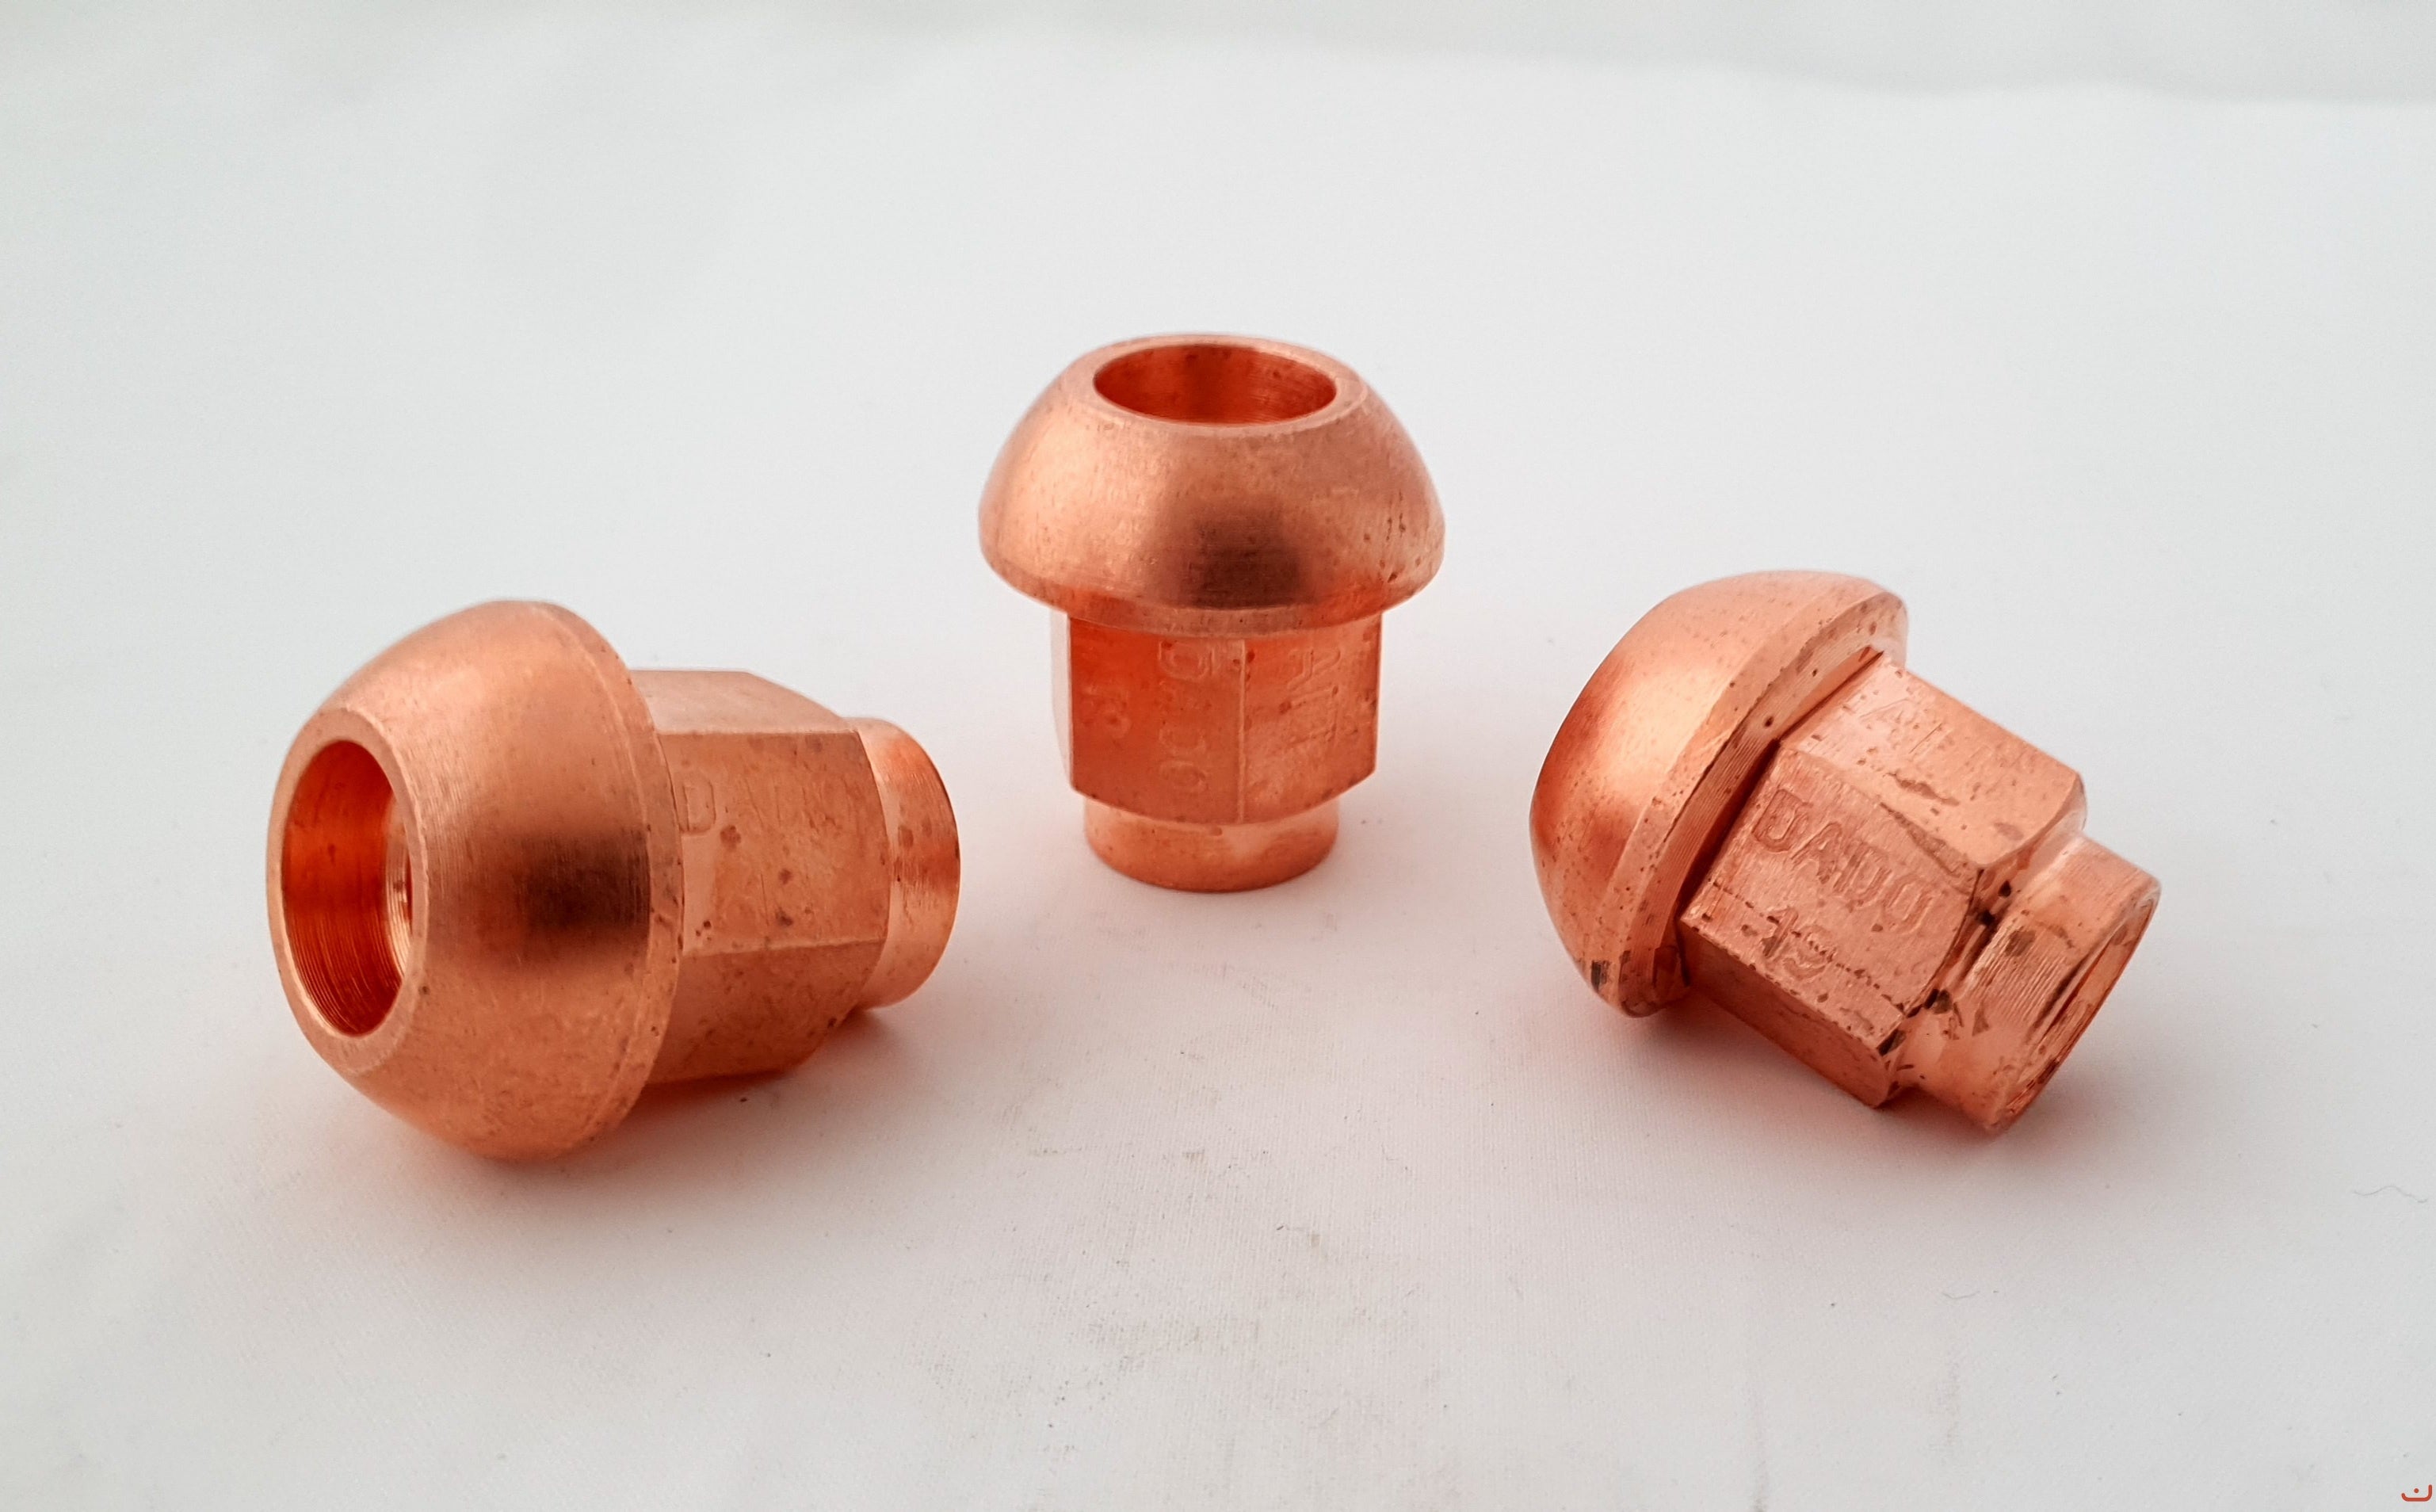 AITECH AIT-DADO-19 Гайка 12x1,5 ex 17mm, od 25mm steel coppered nut spherical SEAT, total lenght 27mm Photo-1 